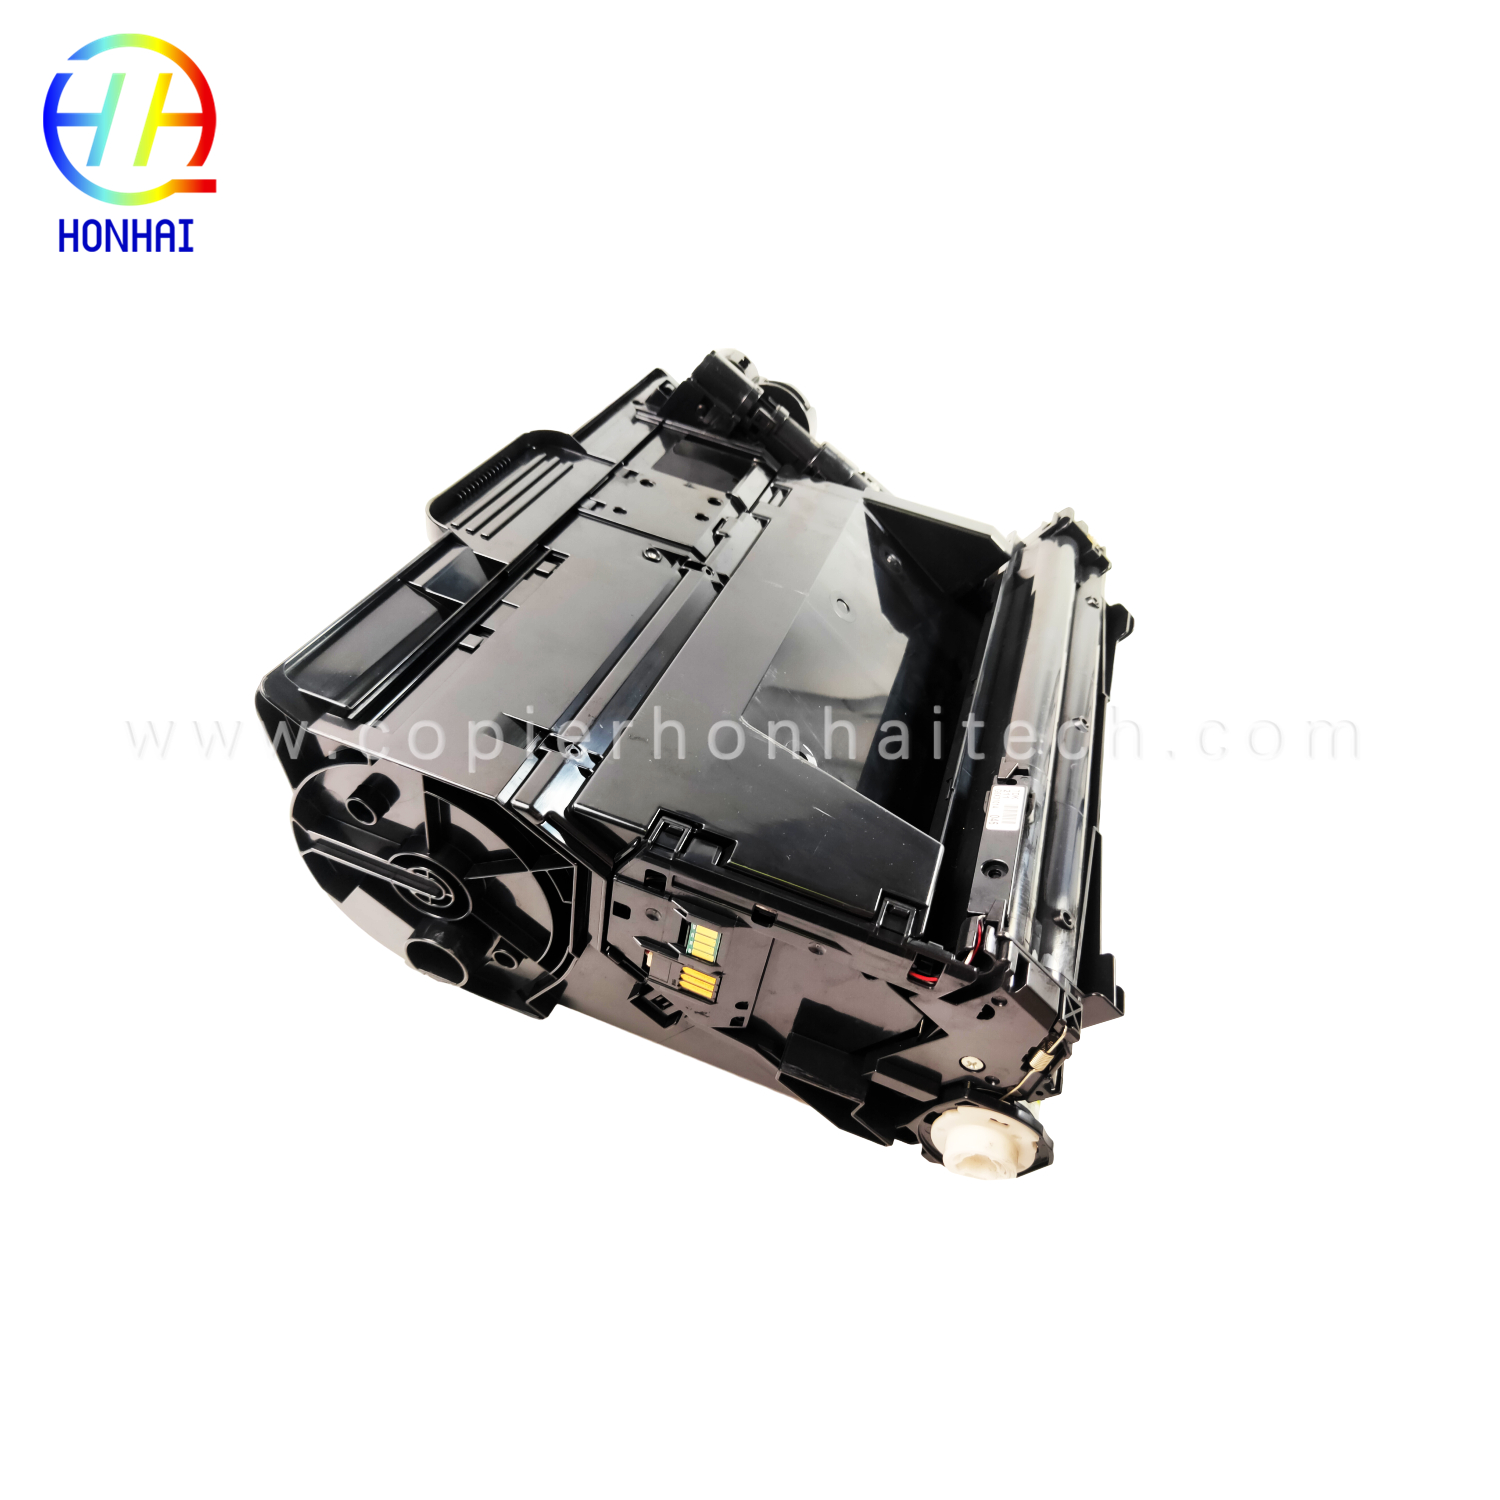 Hộp trống cho Xerox Phaser 3610 WorkCentre 3615 3655 3655i 113R00773 113R773 Bộ trống